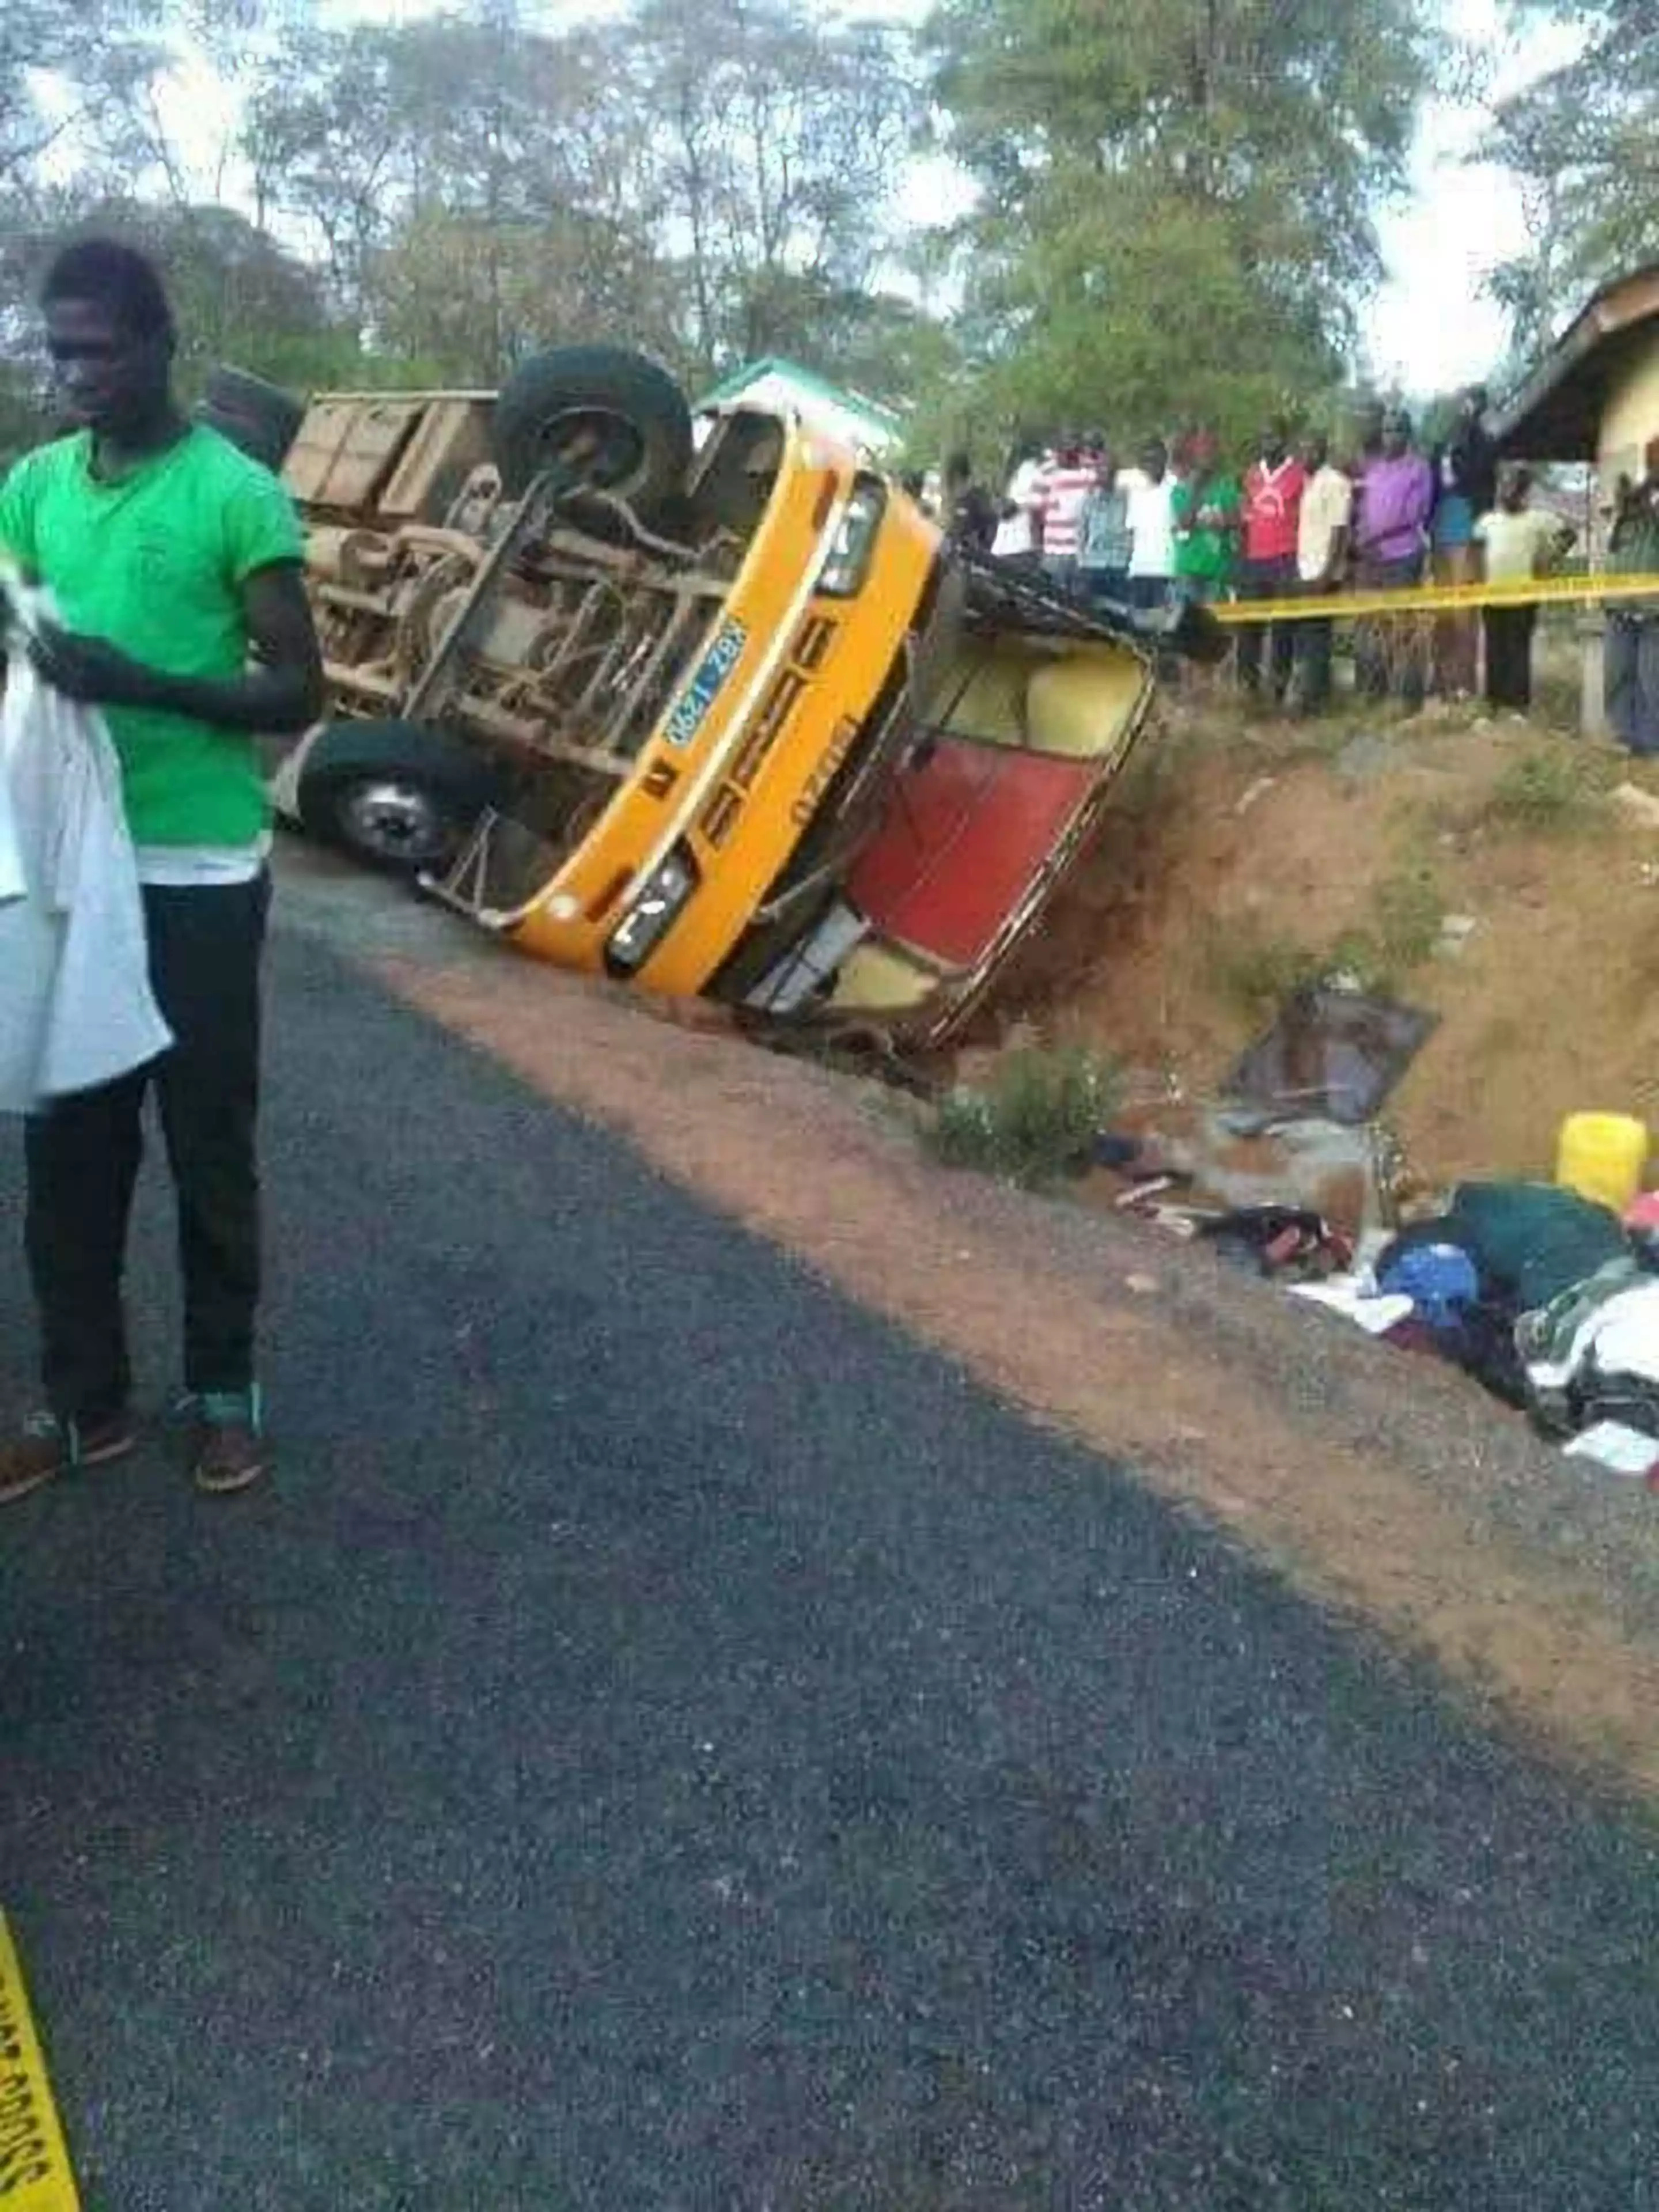 One student killed, 19 others injured in school bus accident